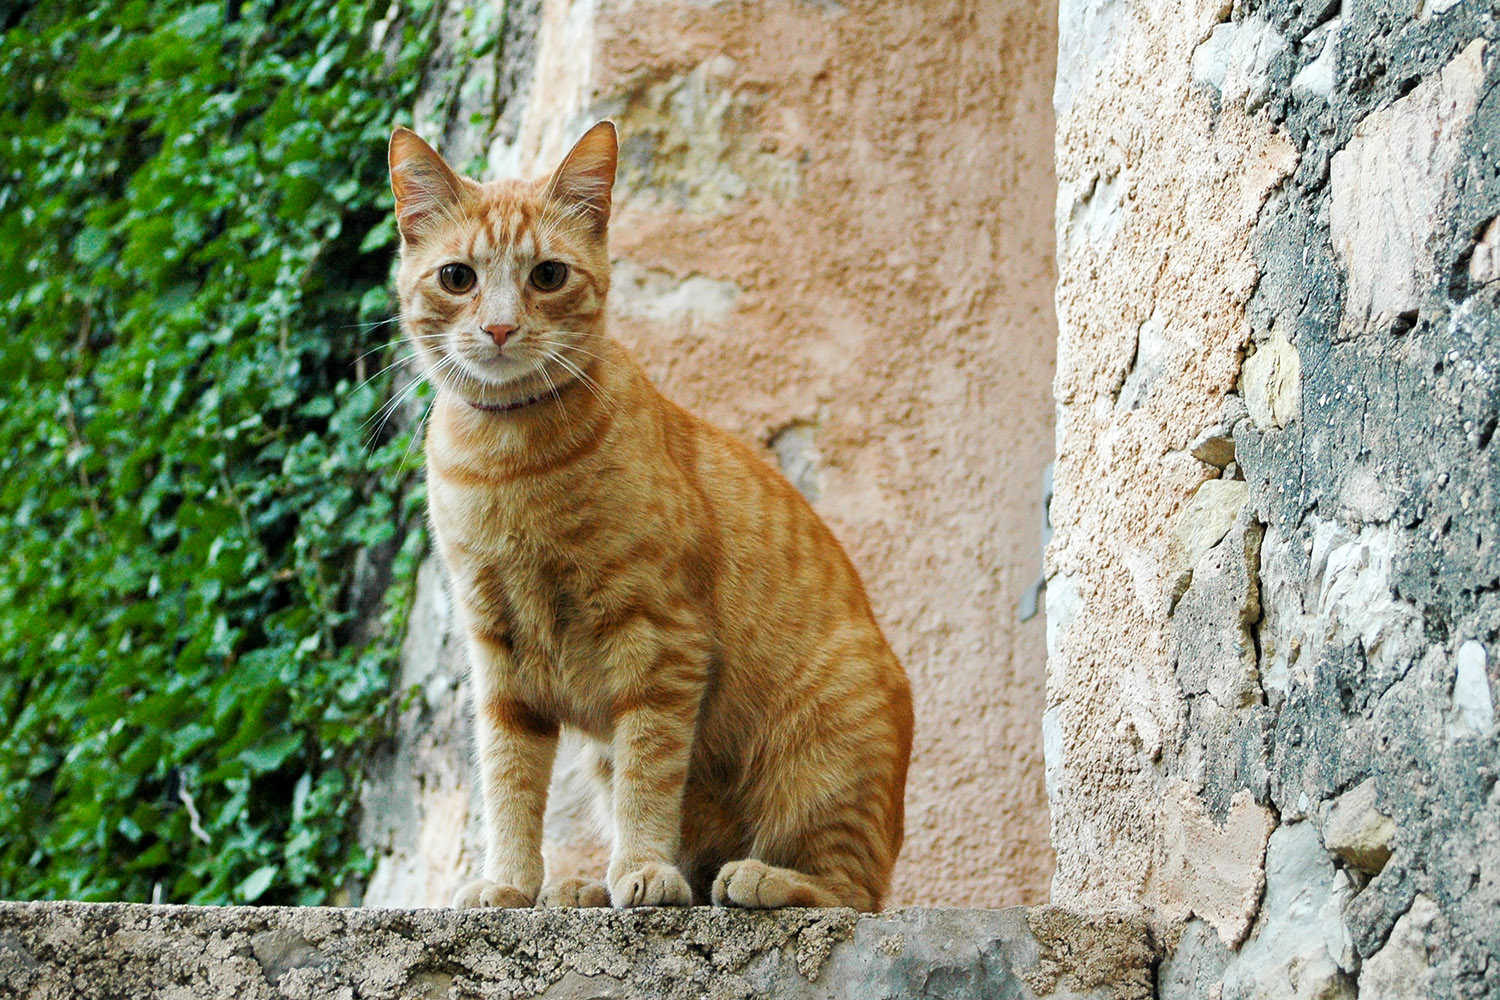 This young ginger cat was photographed in Valbonne